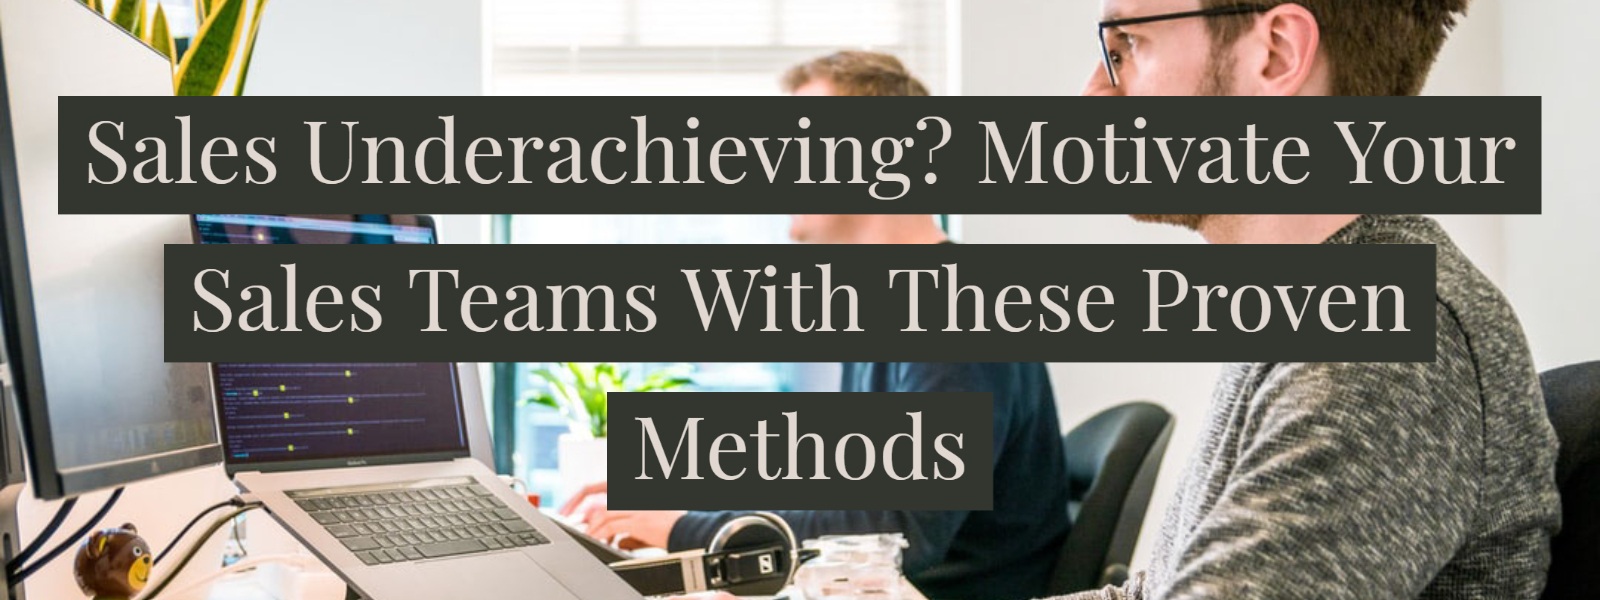 Sales Underachieving? Motivate Your Sales Teams With These Proven Methods